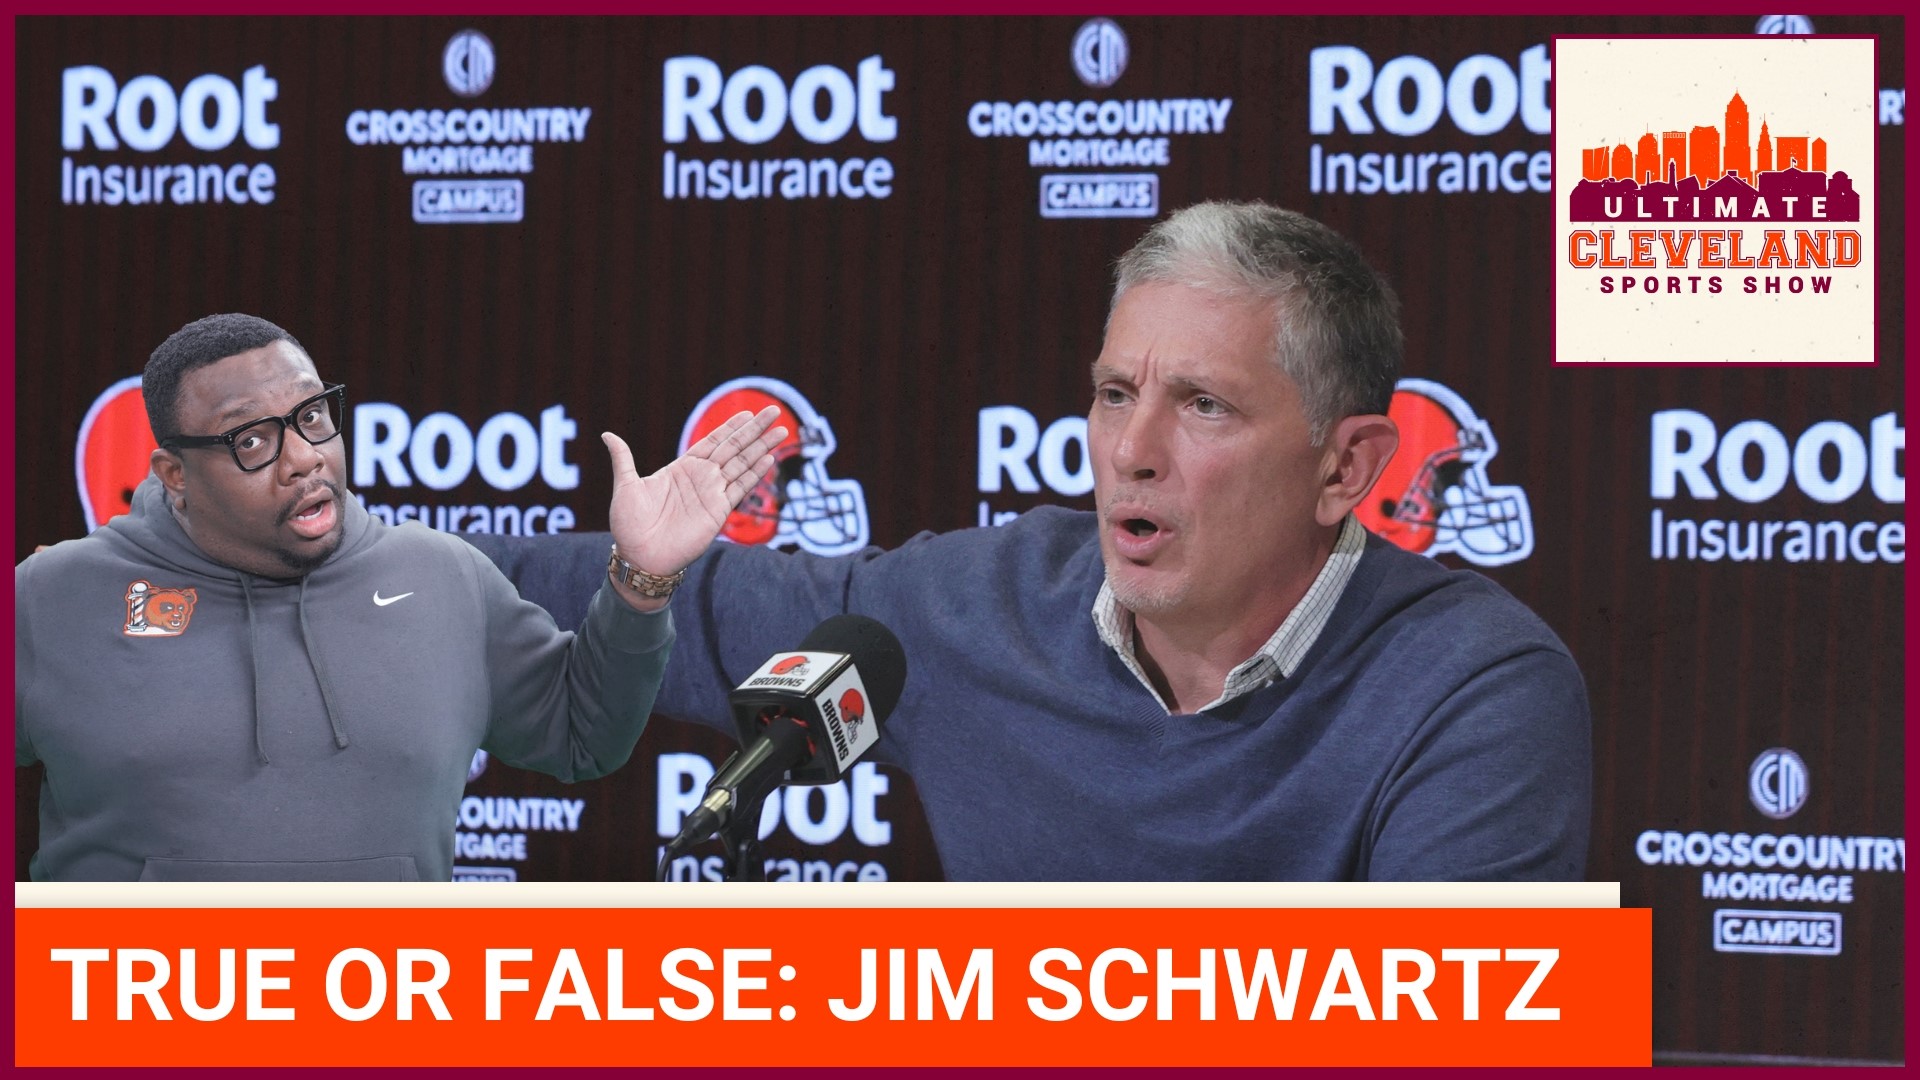 Jim Schwartz played Safety in College, but, was he an All-American?